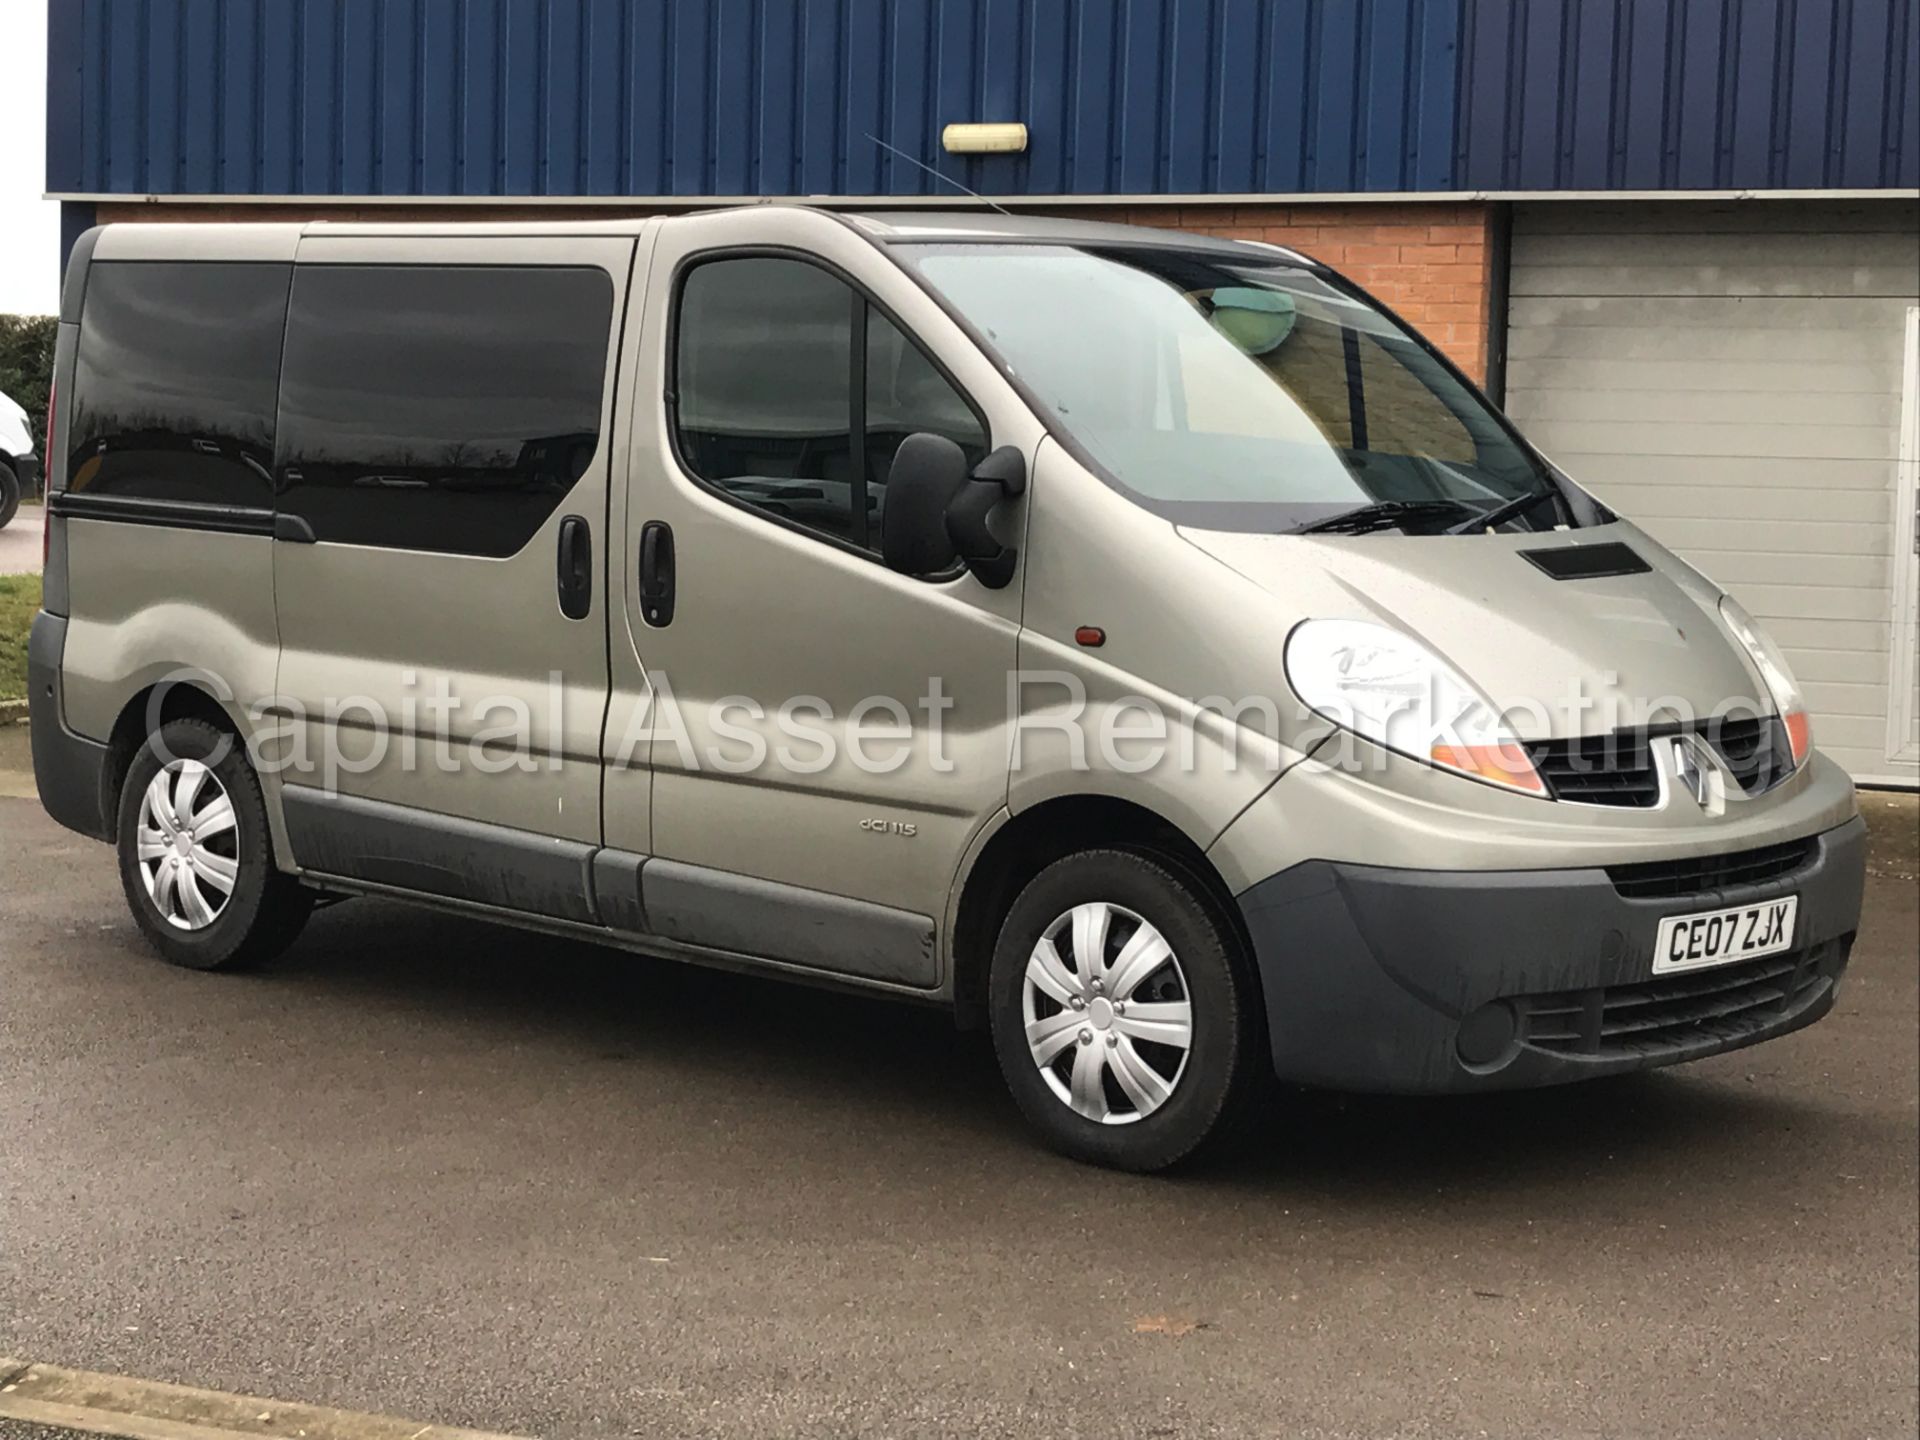 RENAULT TRAFIC SL29 '9 SEATER BUS' (2007) '1.9 DCI - 115 PS - 6 SPEED - A/C' (NO VAT - SAVE 20%)